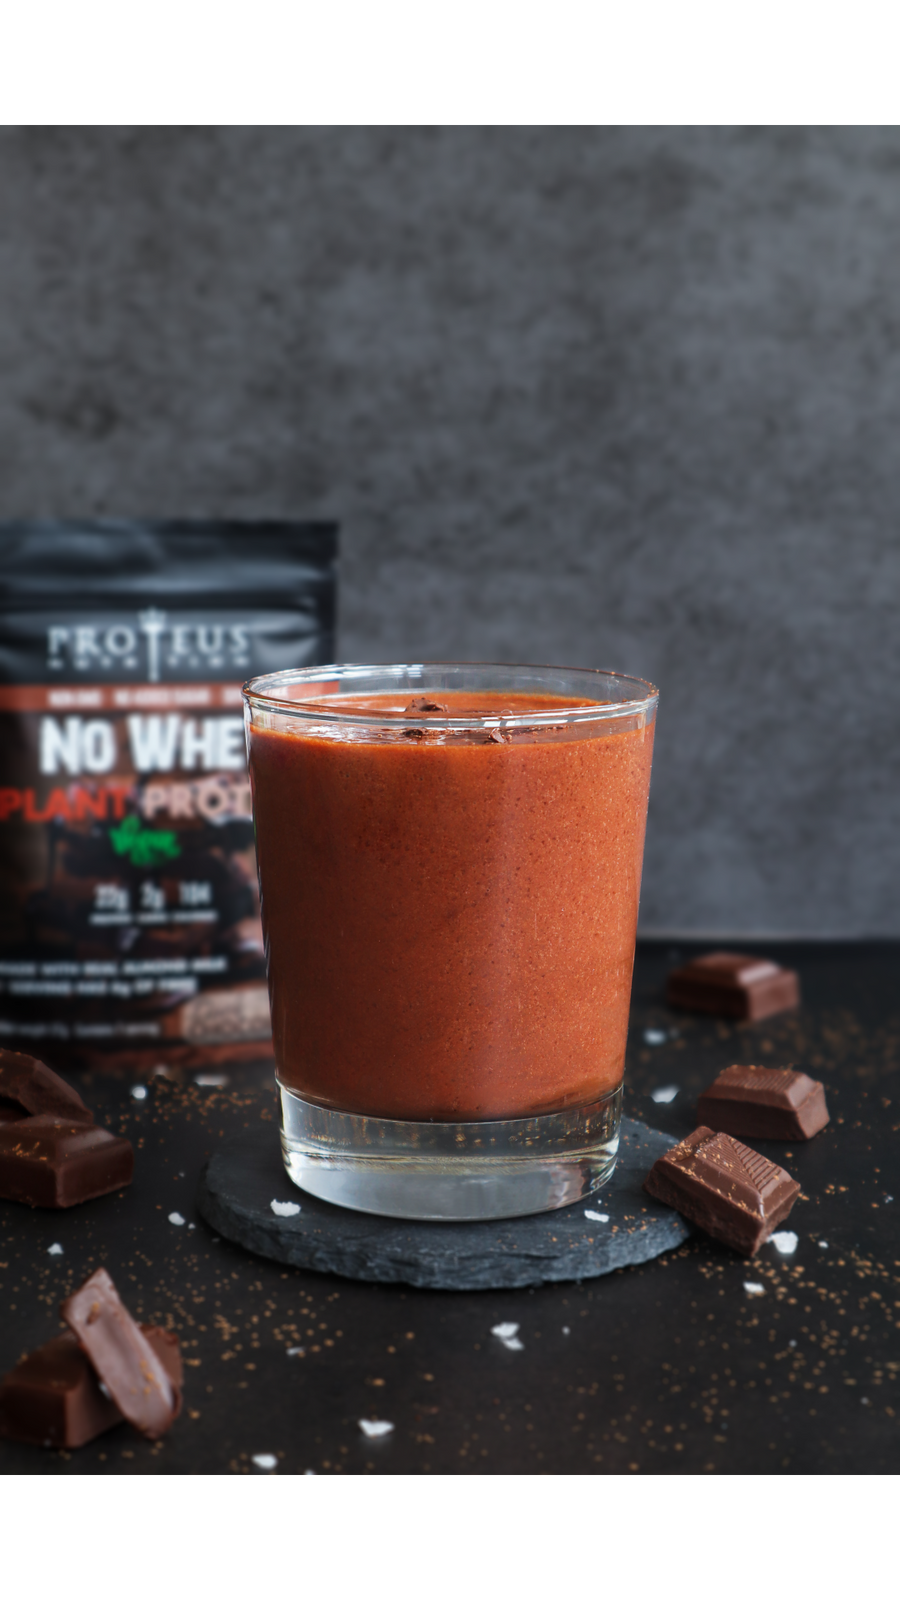 Creamy and Smooth Texture of Dark Chocolate Vegan No-Whey Protein Shake by Proteus Nutrition